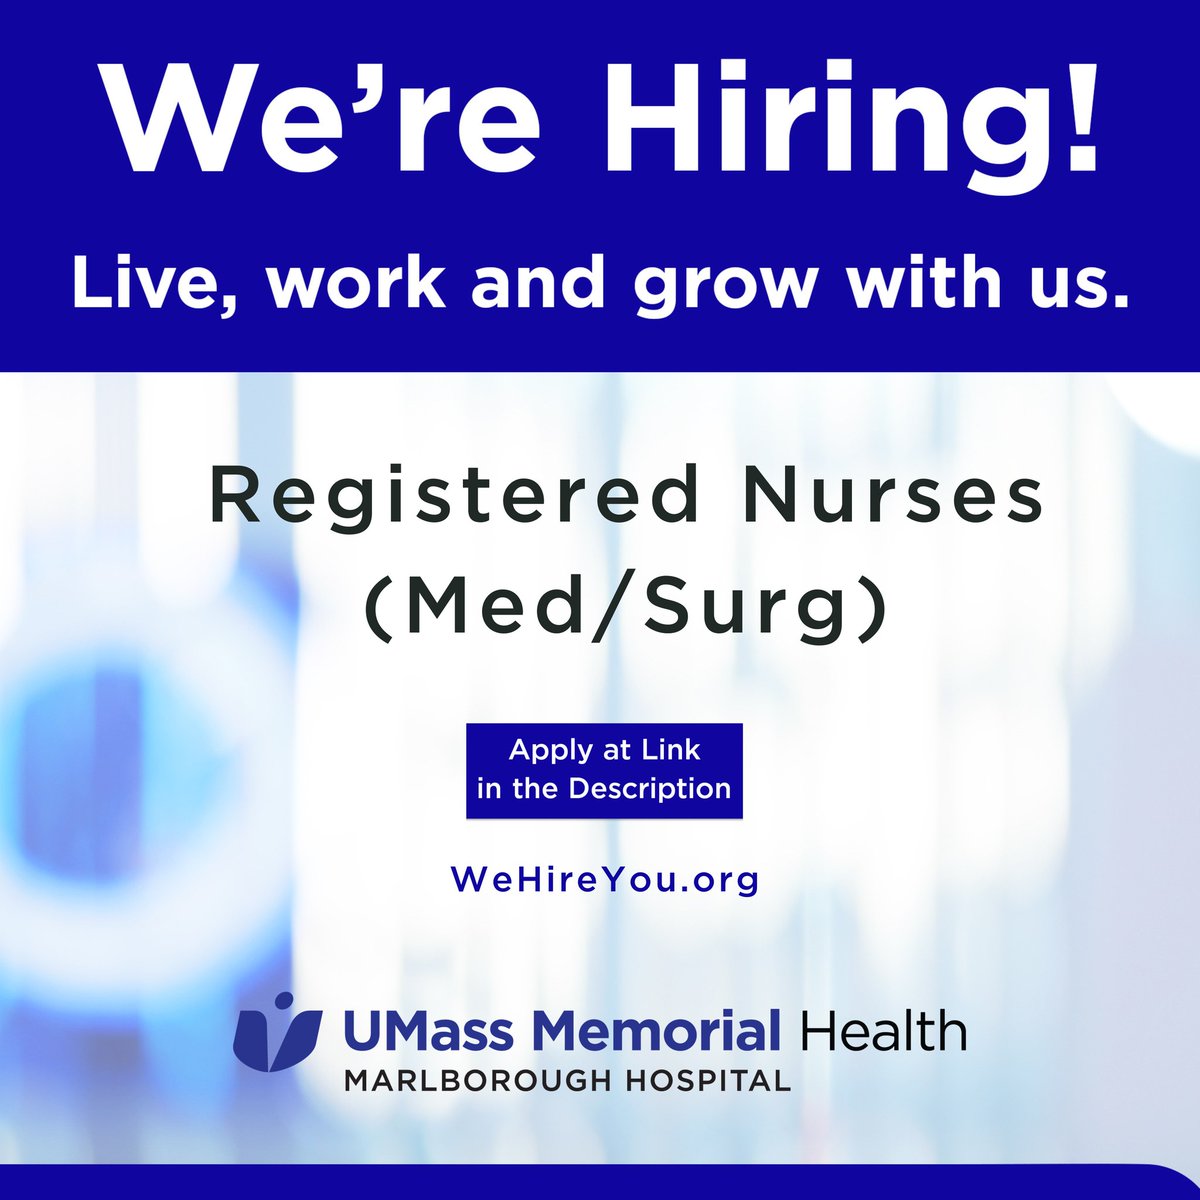 We are actively hiring Registered Nurses in Med/Surg!

Experience competitive pay, enjoy comprehensive benefits, and work for an organization that values you!

Visit the link here to learn more and apply TODAY: tinyurl.com/4wcvvuhv #HappyNursesWeek